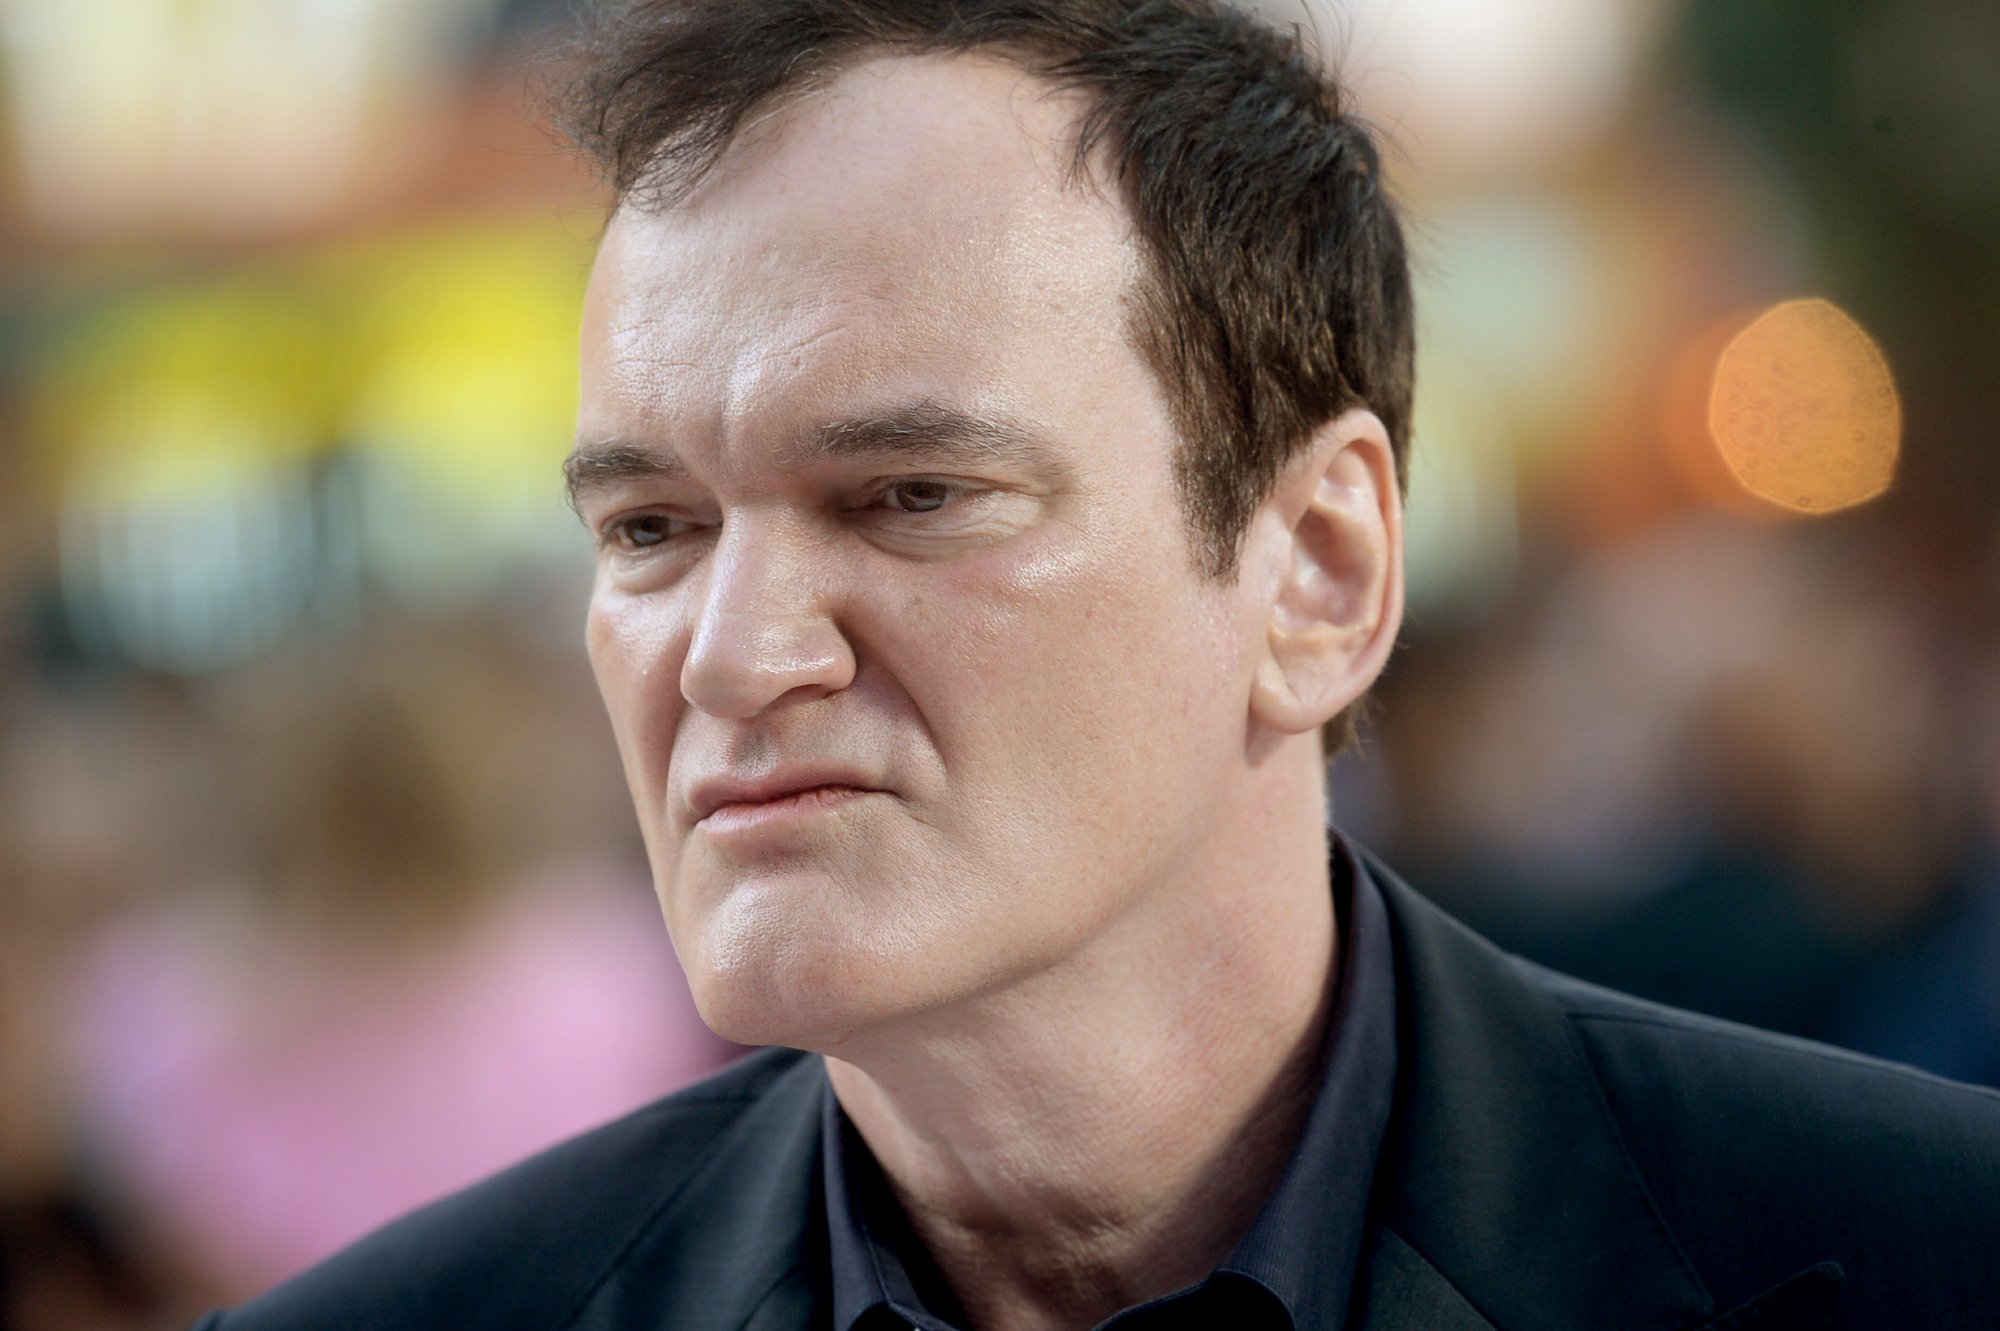 Filmmaker Quentin Tarantino at the 'Once Upon a Time in Hollywood' U.K. premiere wearing a black jacket and dark blue collared shirt